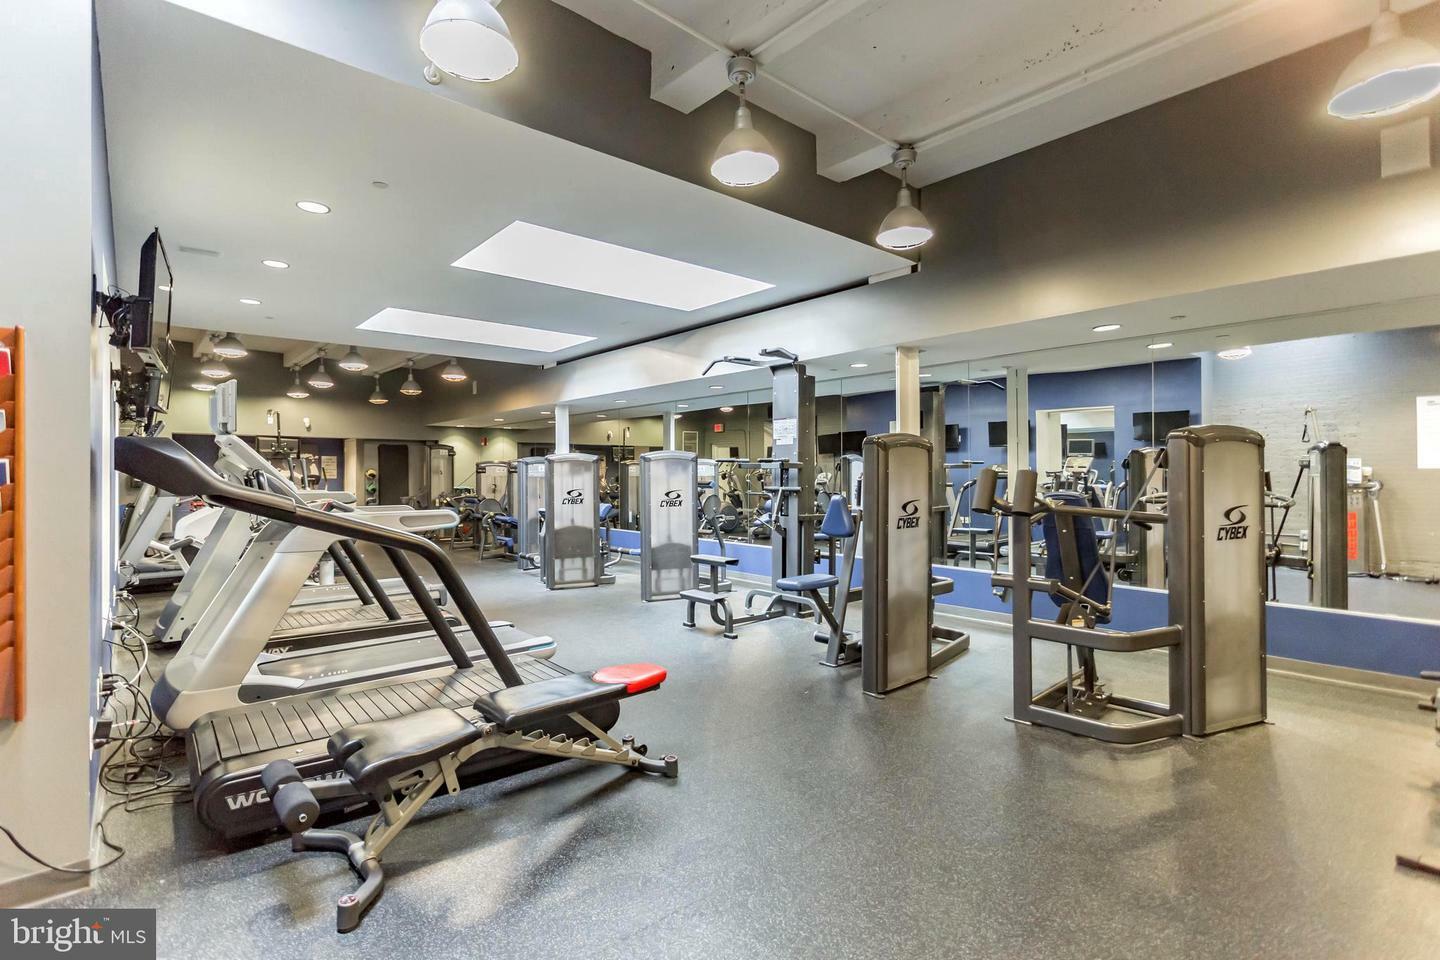 State-of-the-art gym facility in a Philadelphia apartment complex, featuring modern equipment and spacious layout.